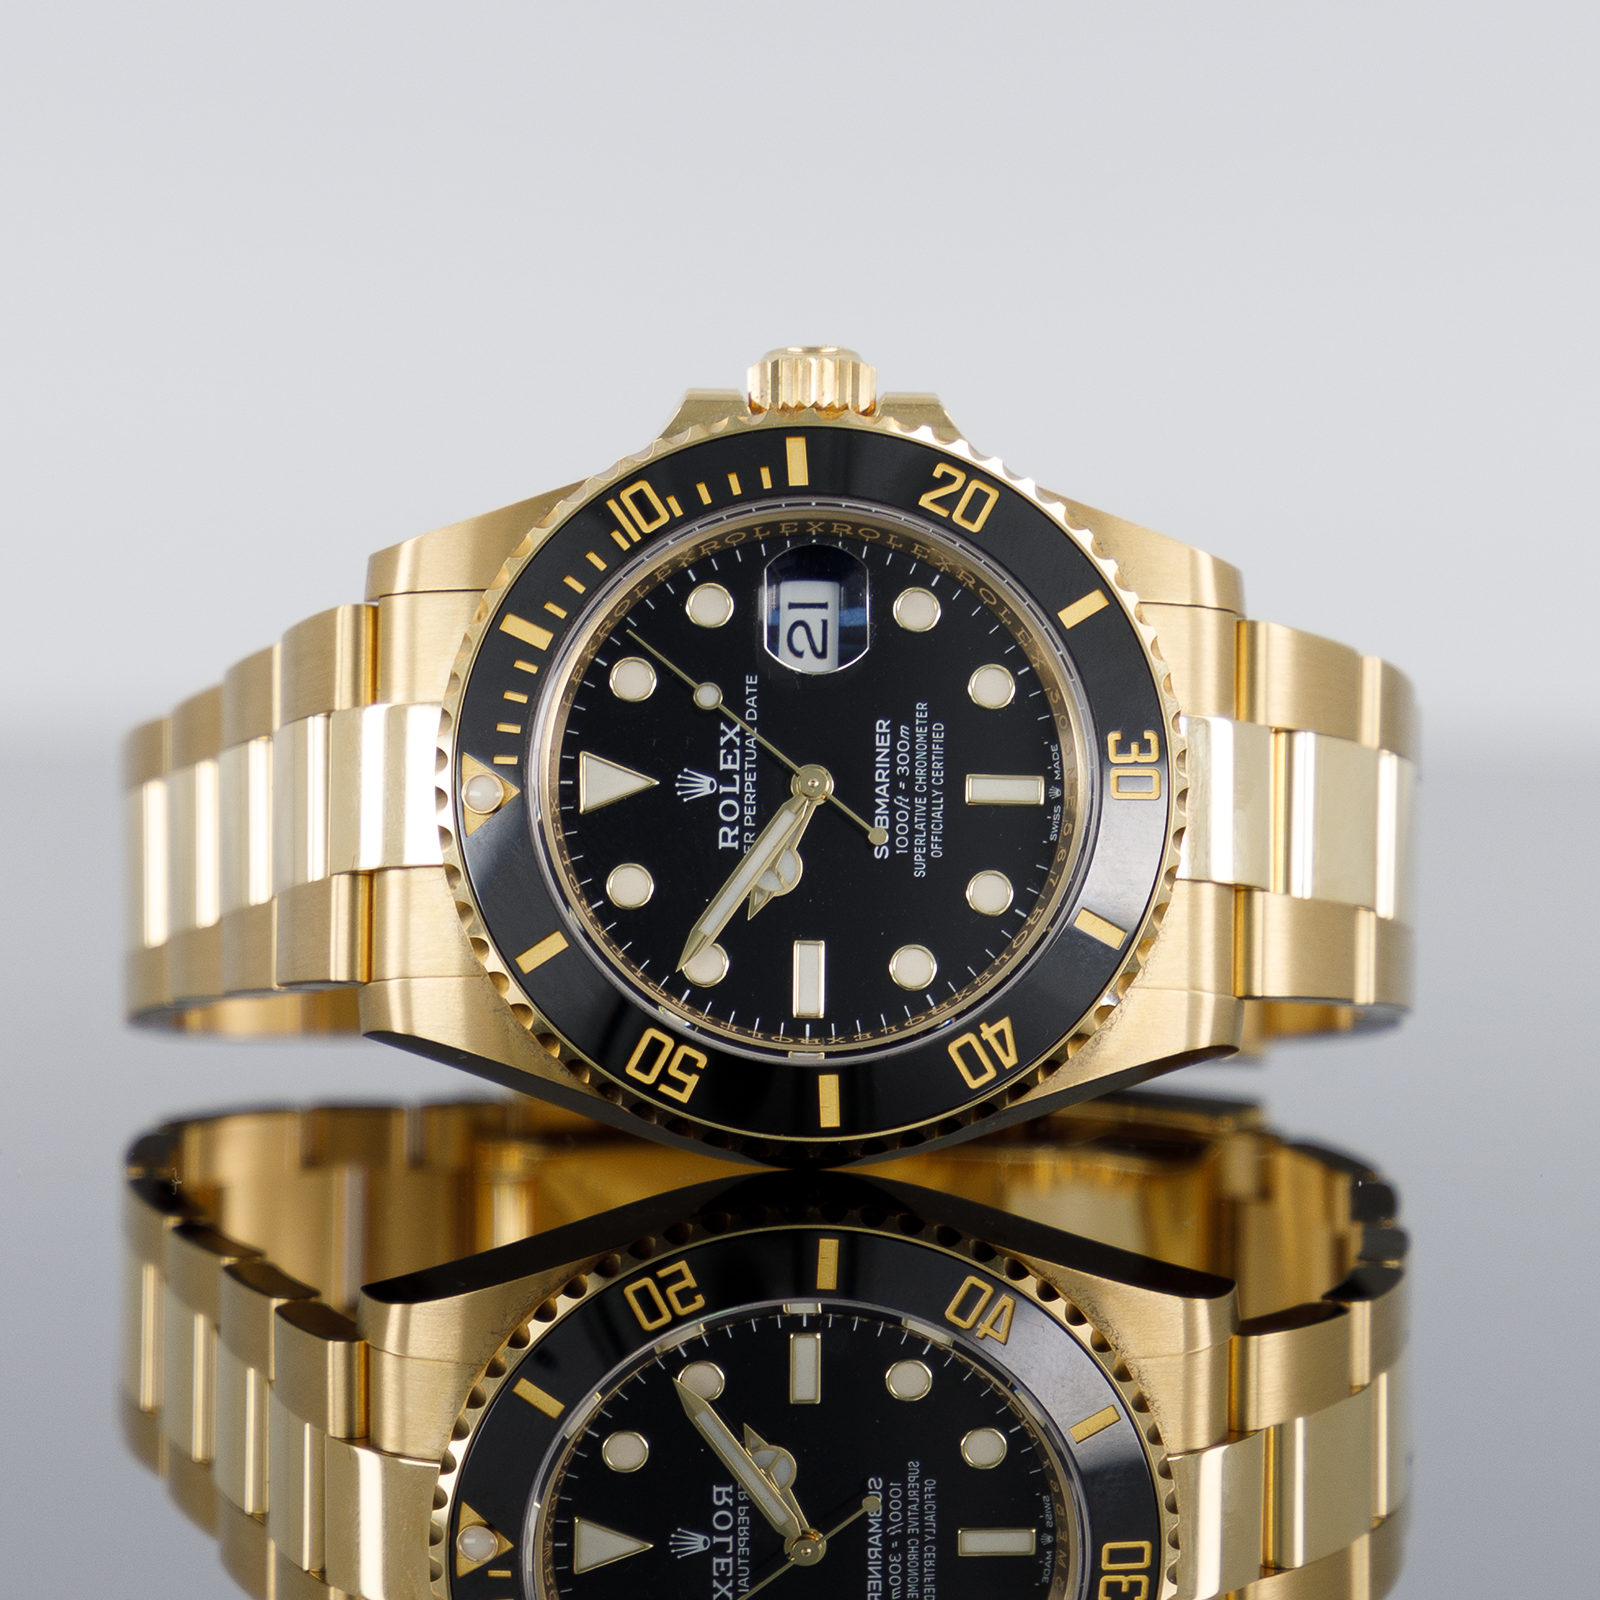 Rolex Submariner Date 41mm Yellow Gold Black Dial 126618LN Ref.567